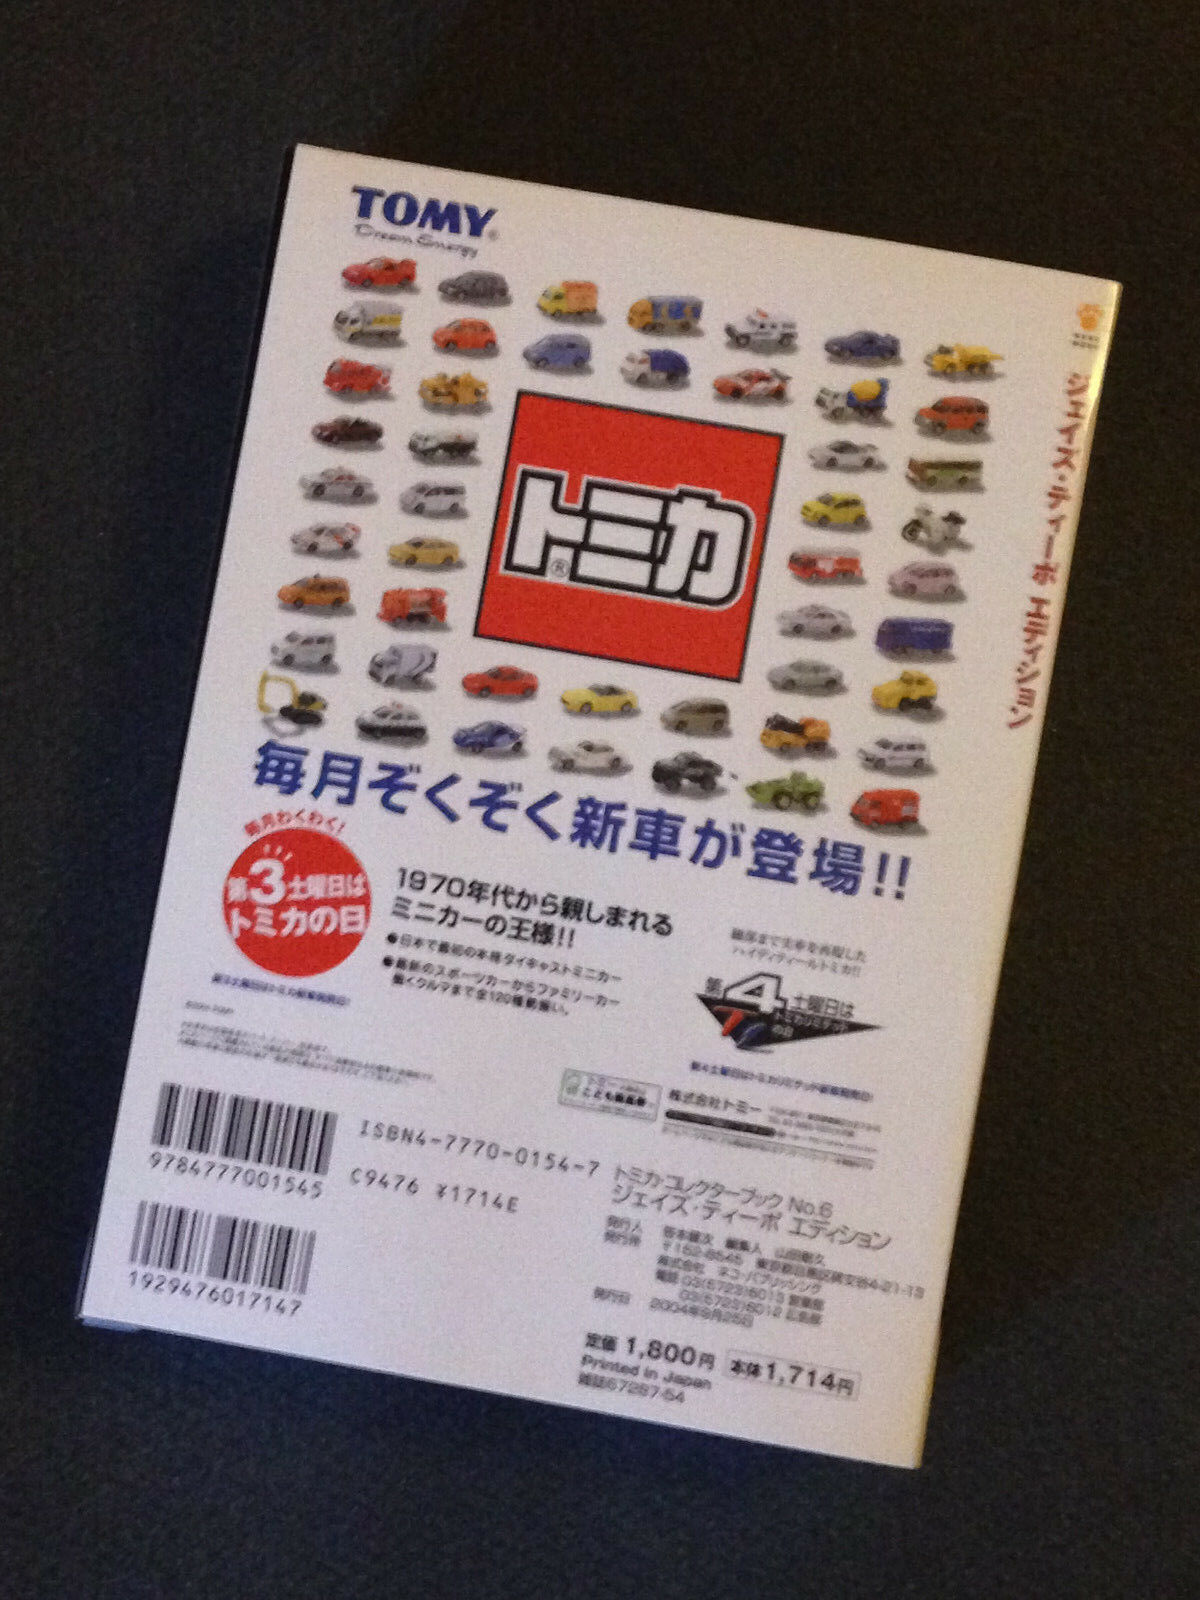 Nissan Skyline RS Turbo Super Silhouette #11 Late Version Tomy Tomica OVP 1:68